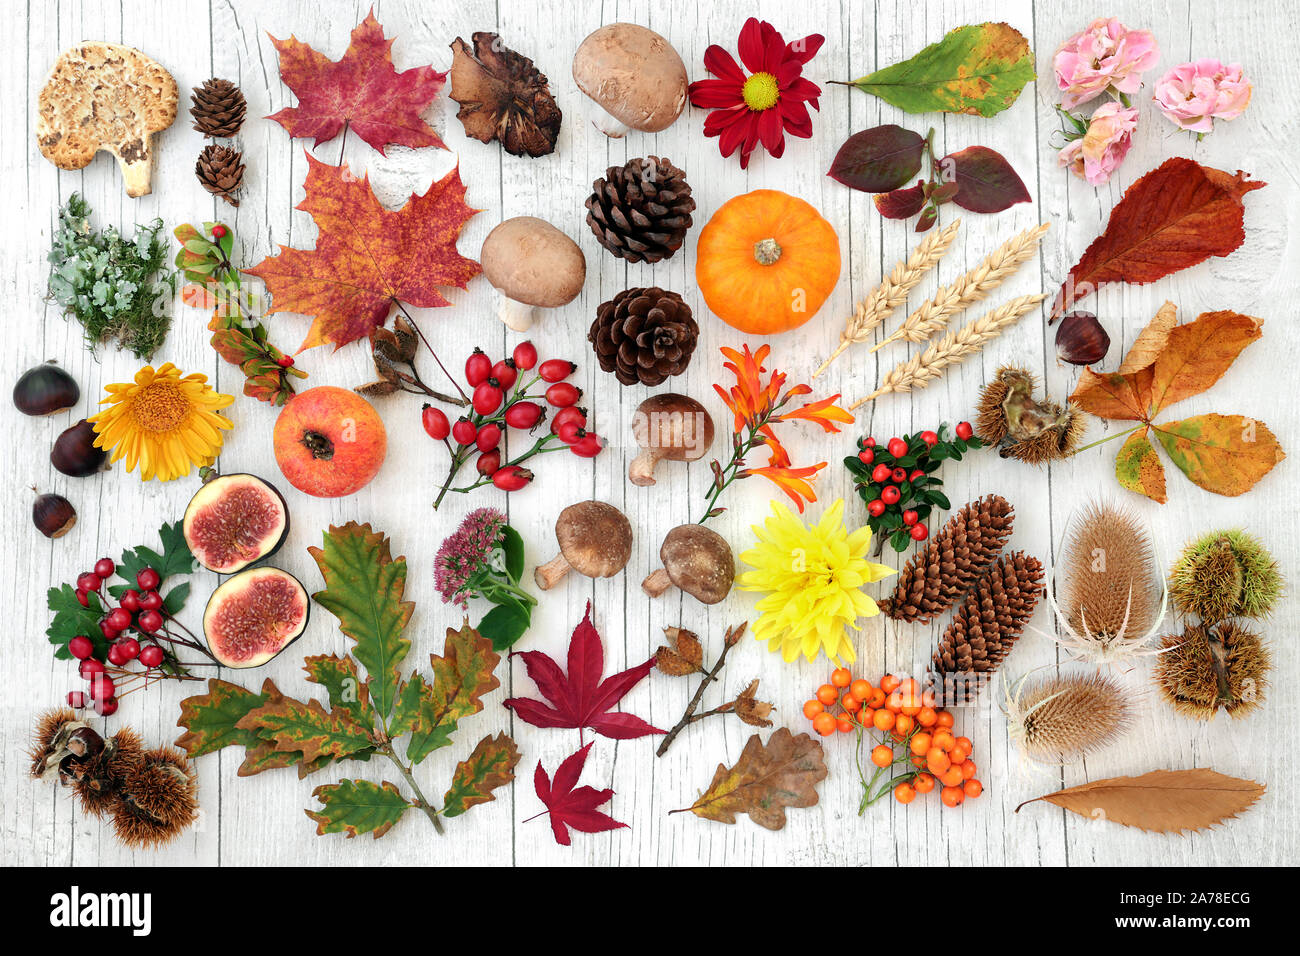 Autumn nature botanical study with food, flora and fauna on rustic wood background. Top view. Harvest festival concept. Flat lay. Stock Photo